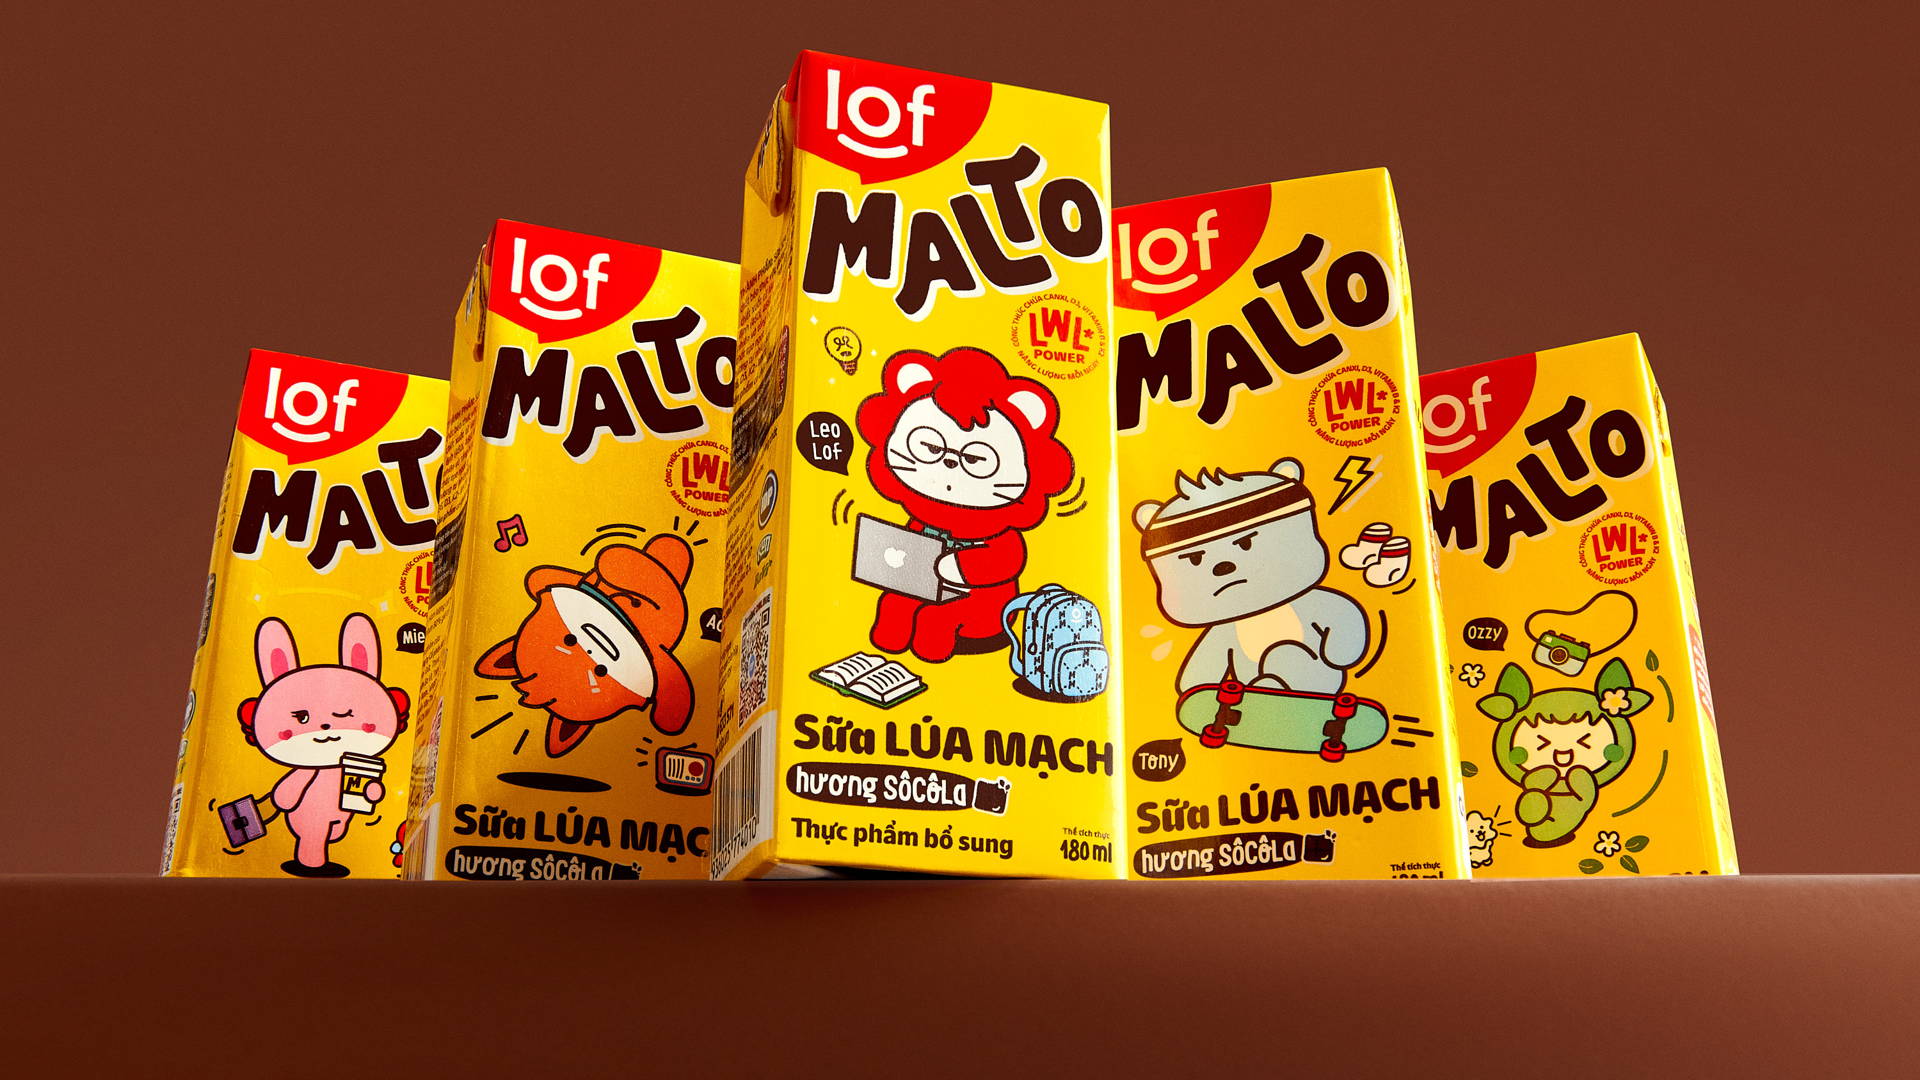 Featured image for How Malto's Fresh New Look is Shaking Up Vietnam's Dairy Market